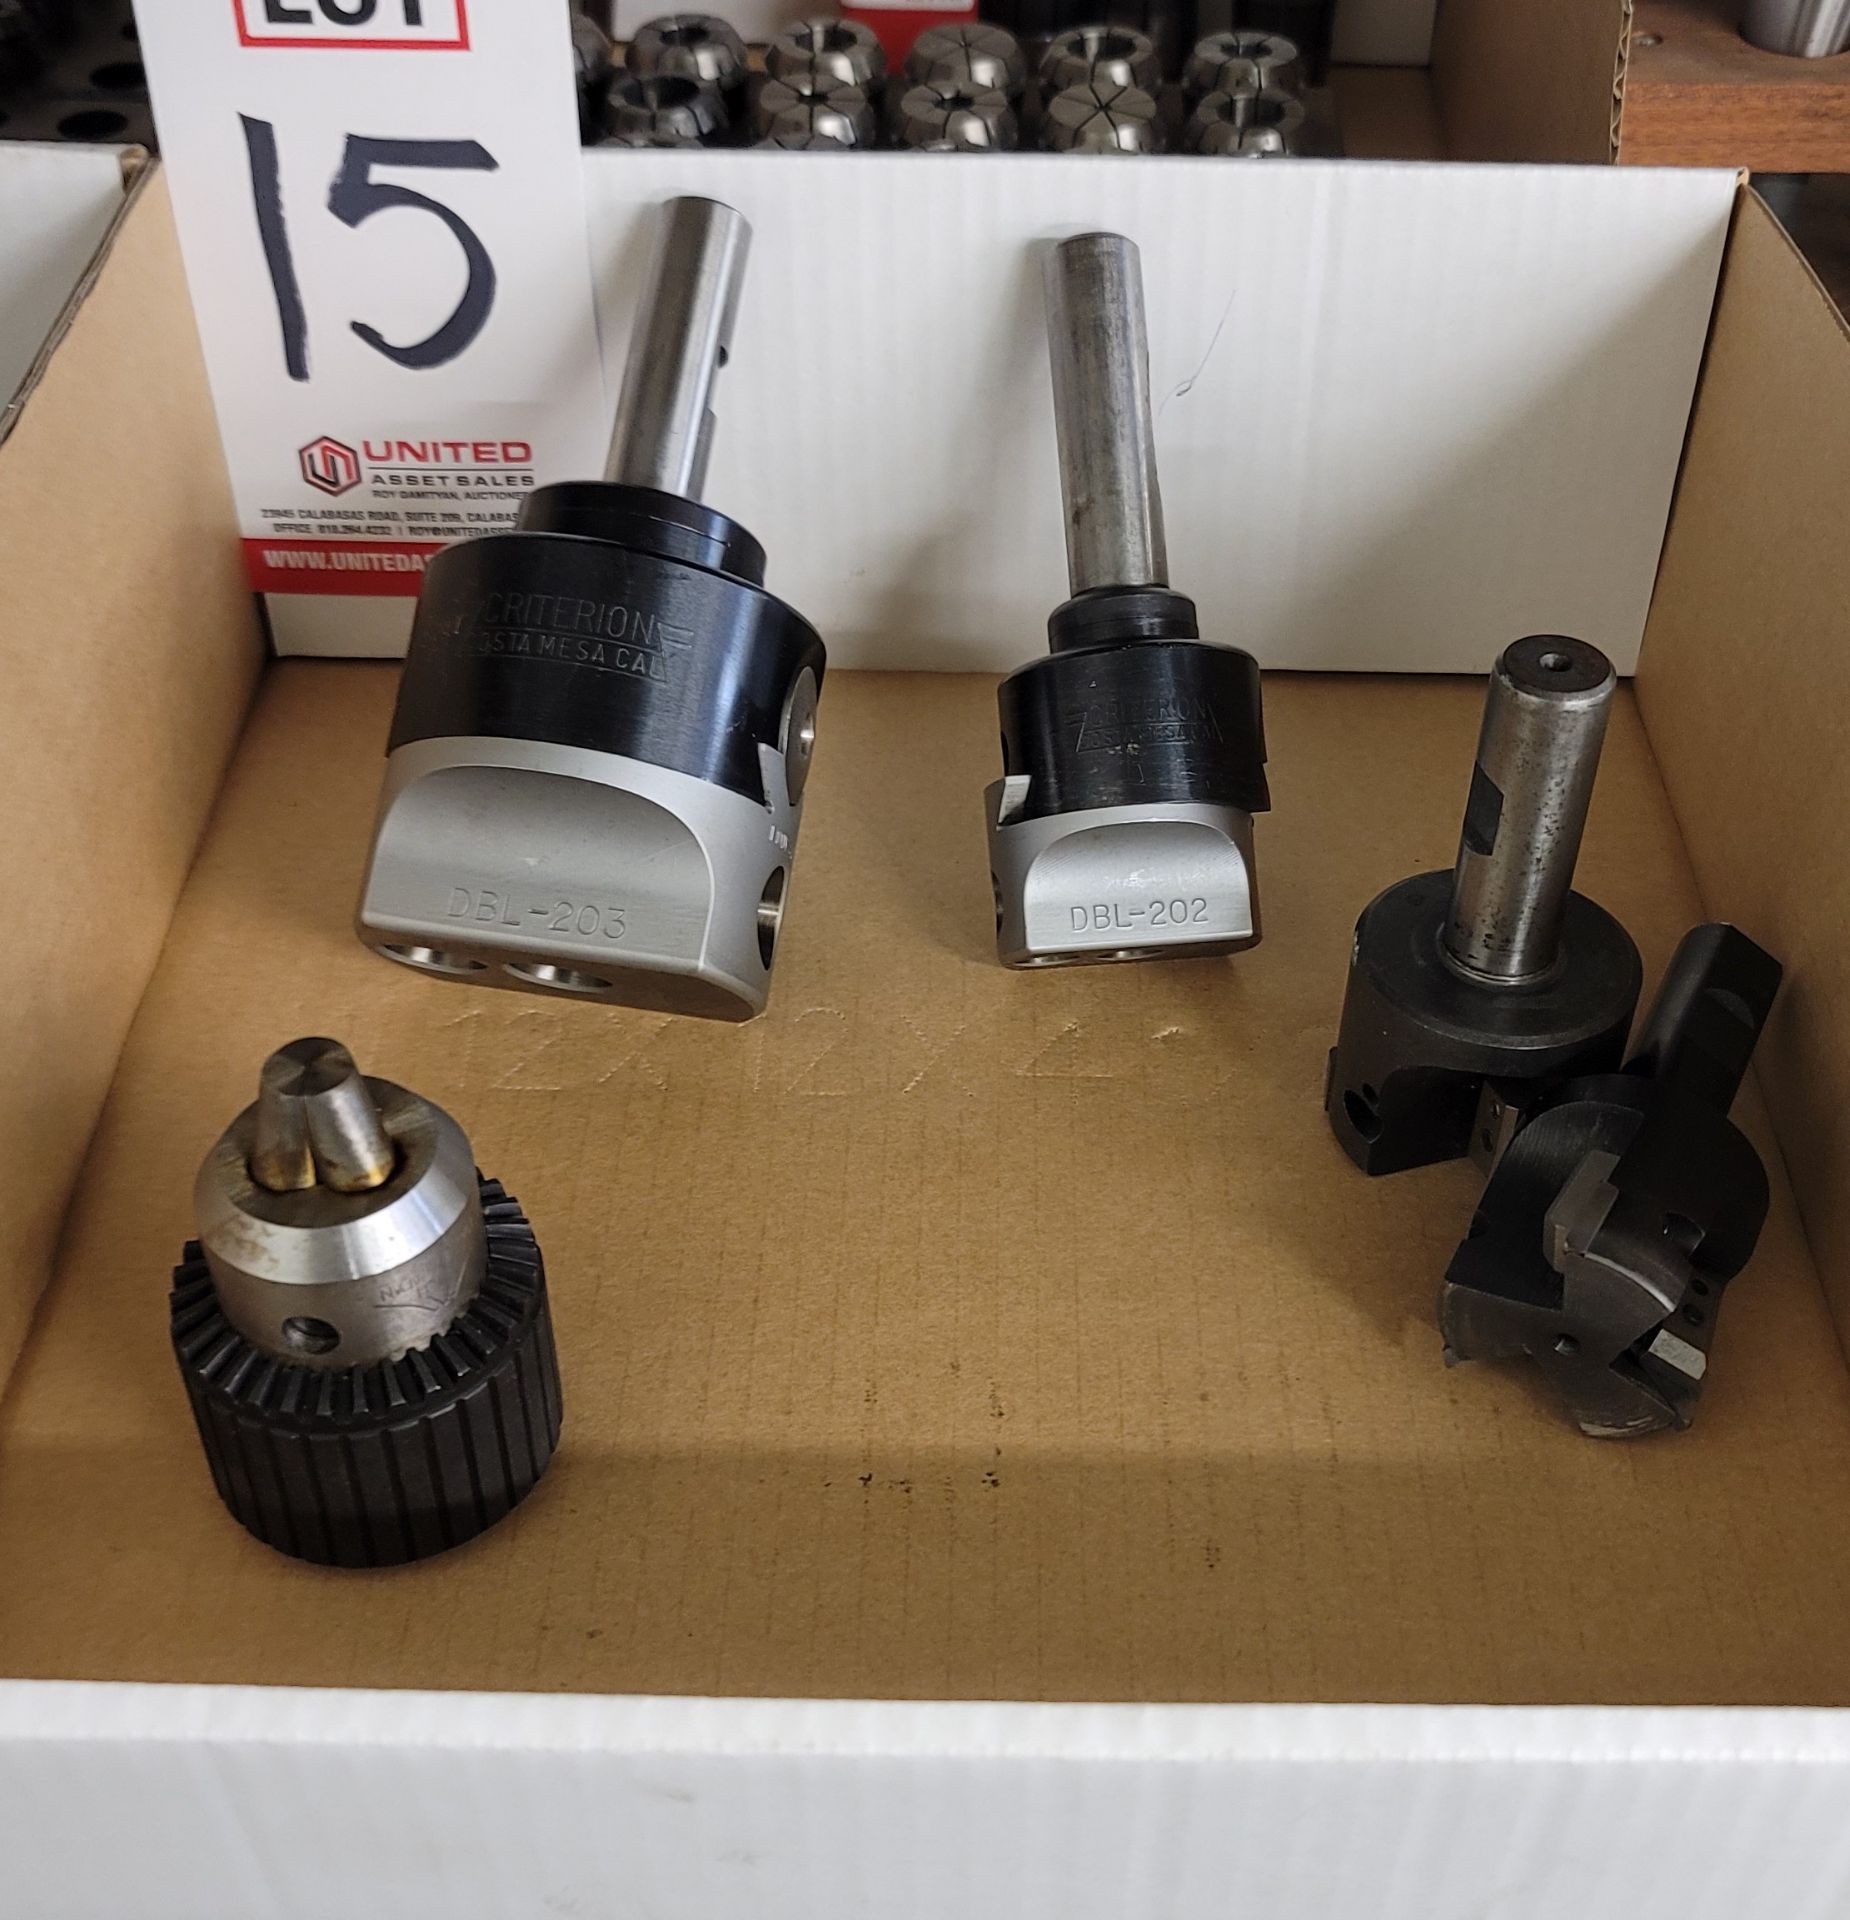 LOT - CRITERION DBL202 AND DBL203 BORING HEADS, FUJI 1/2" CHUCK AND (2) INSERTION CUTTING TOOLS